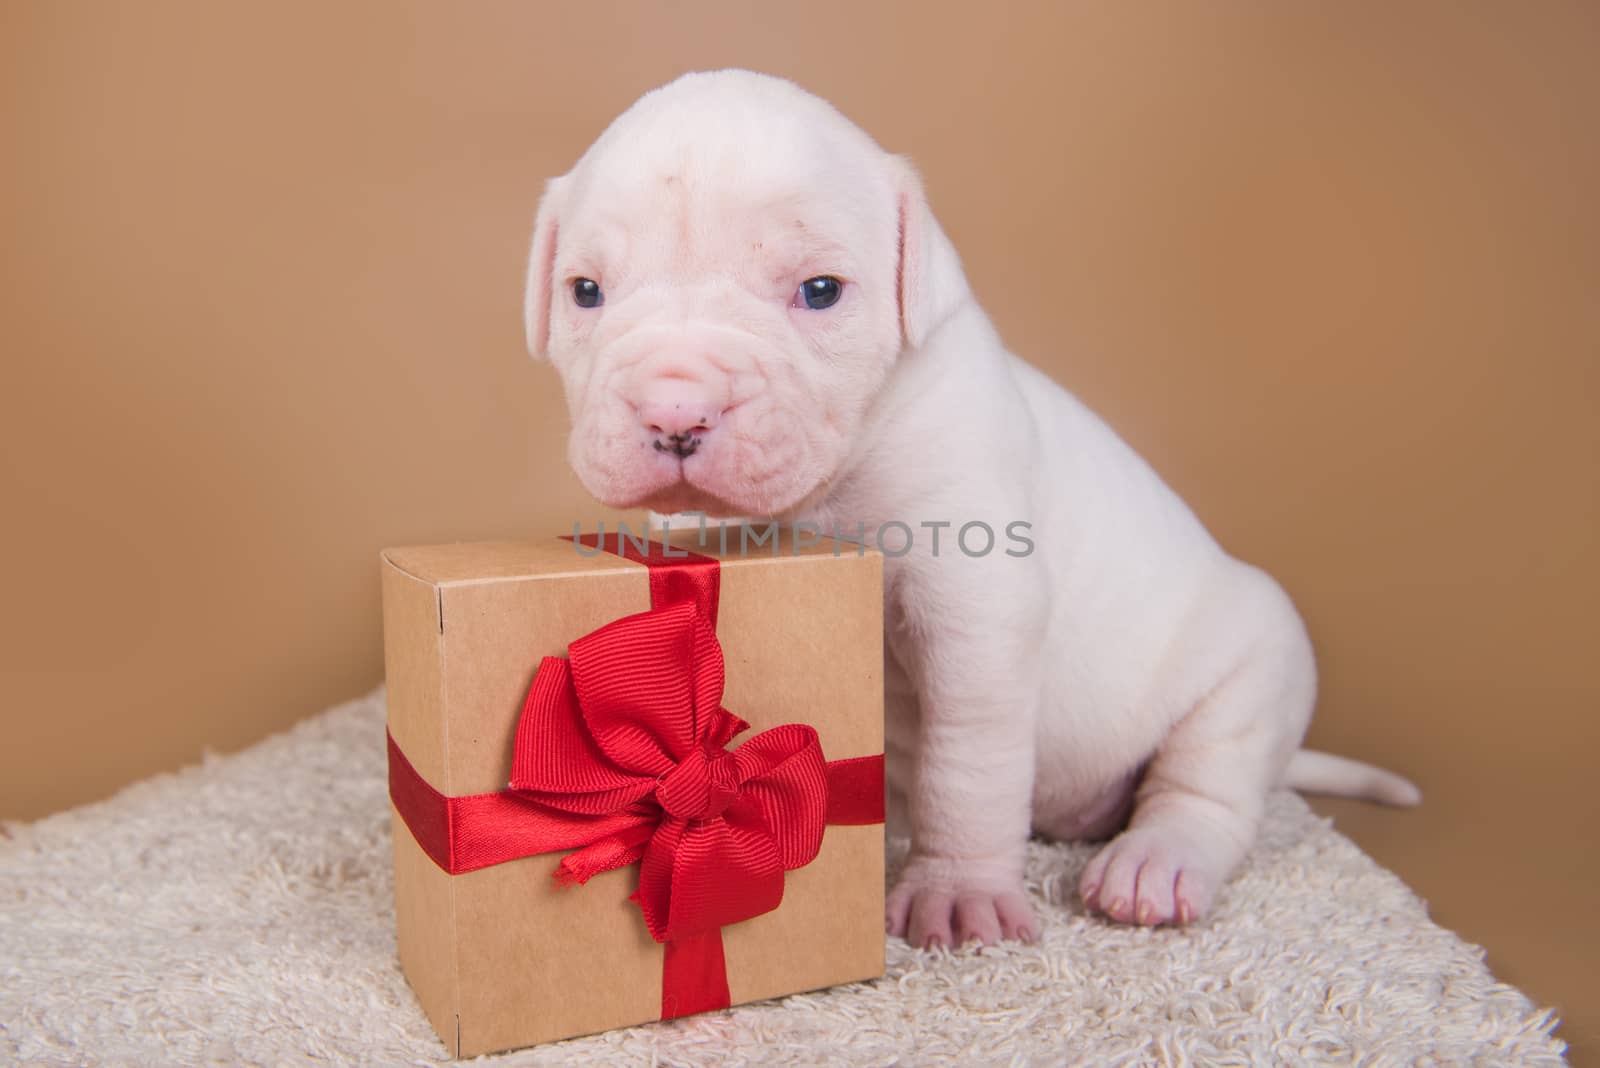 Funny small American Bulldog puppy dog is sitting with gift box